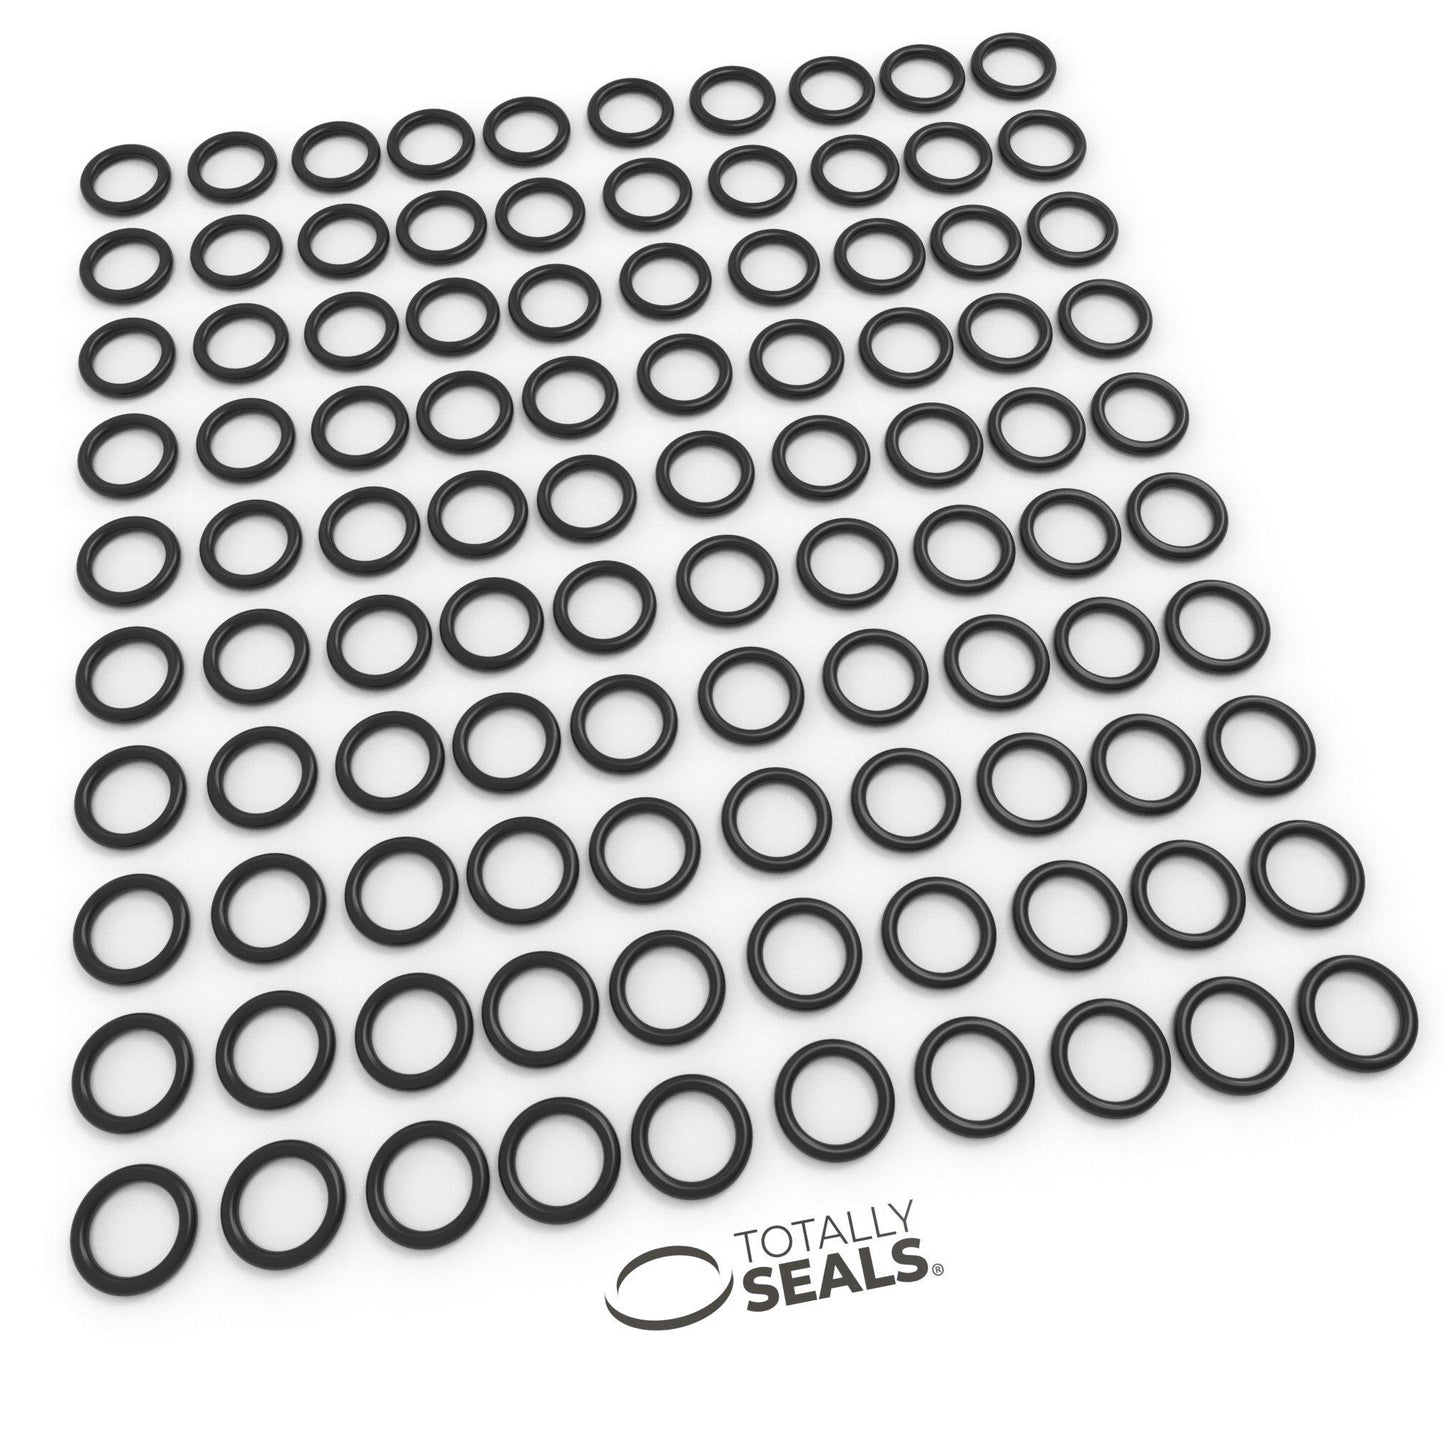 25mm x 2mm (29mm OD) Nitrile O-Rings - Totally Seals®